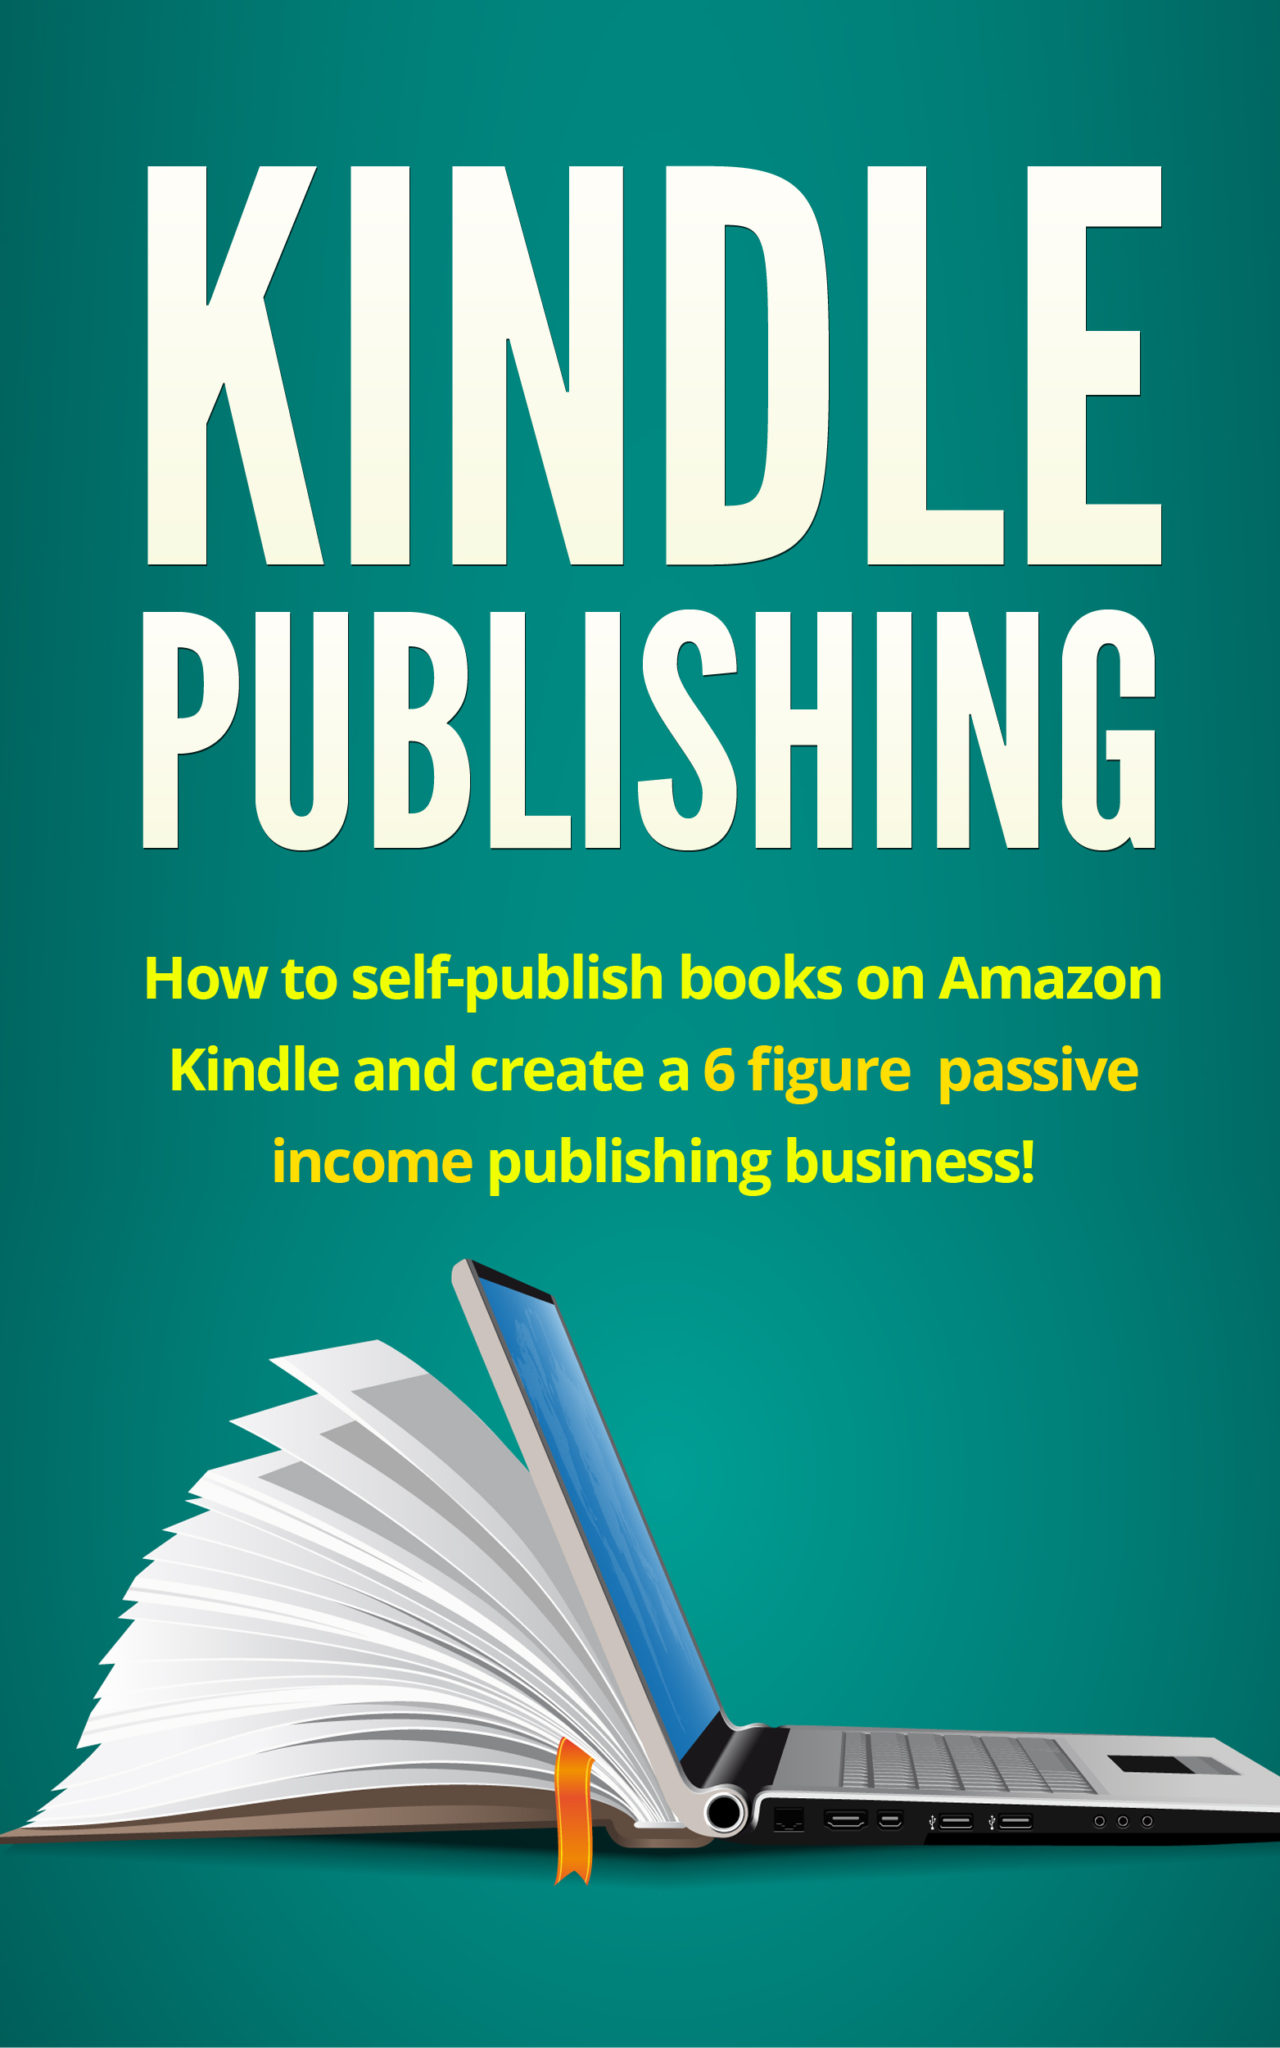 FREE: Kindle Publishing: How to self-publish books on Amazon Kindle and create a 6 figure passive income publishing business! by Adrian Ingram